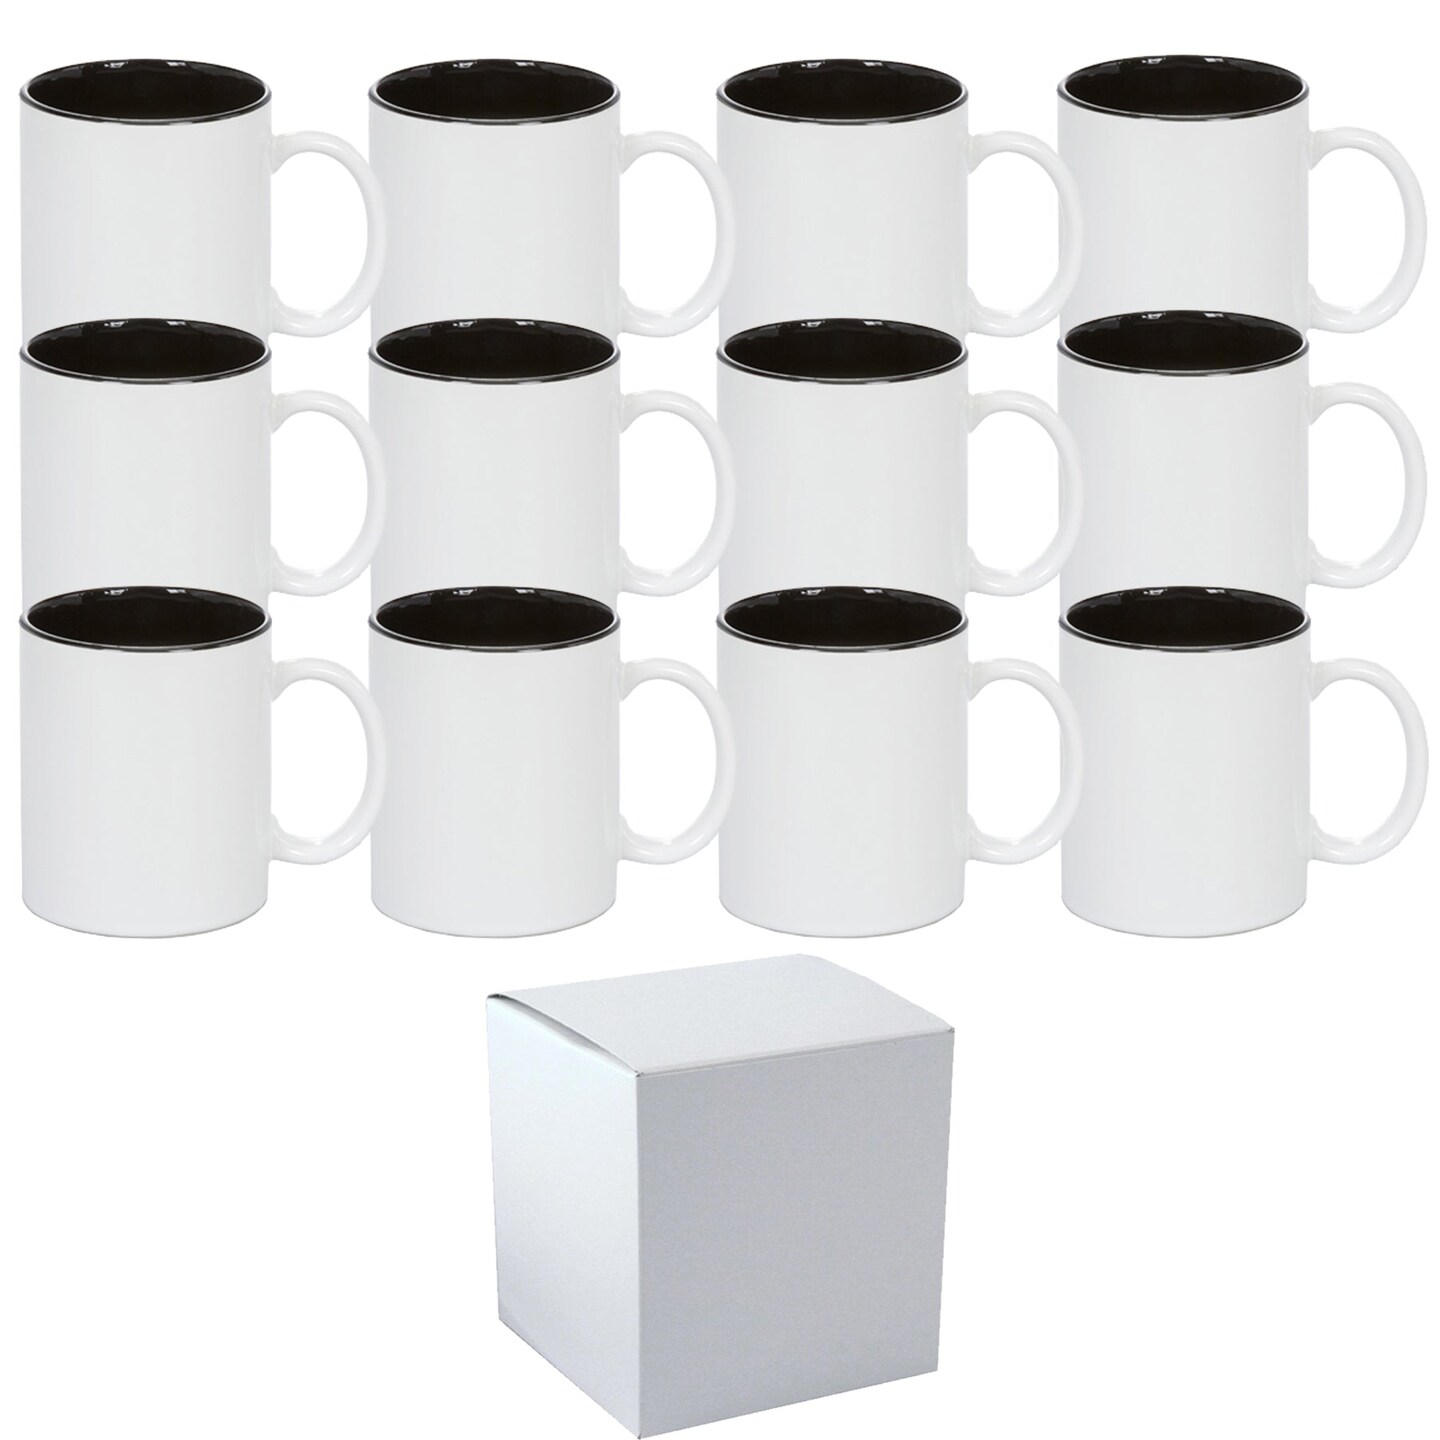 12 PACK 11 oz. Ceramic Mug - Two-Tone Sublimation Blank Mugs - BLACK Inner  and WHITE Handle - Individually Packed in a White Gift Boxes